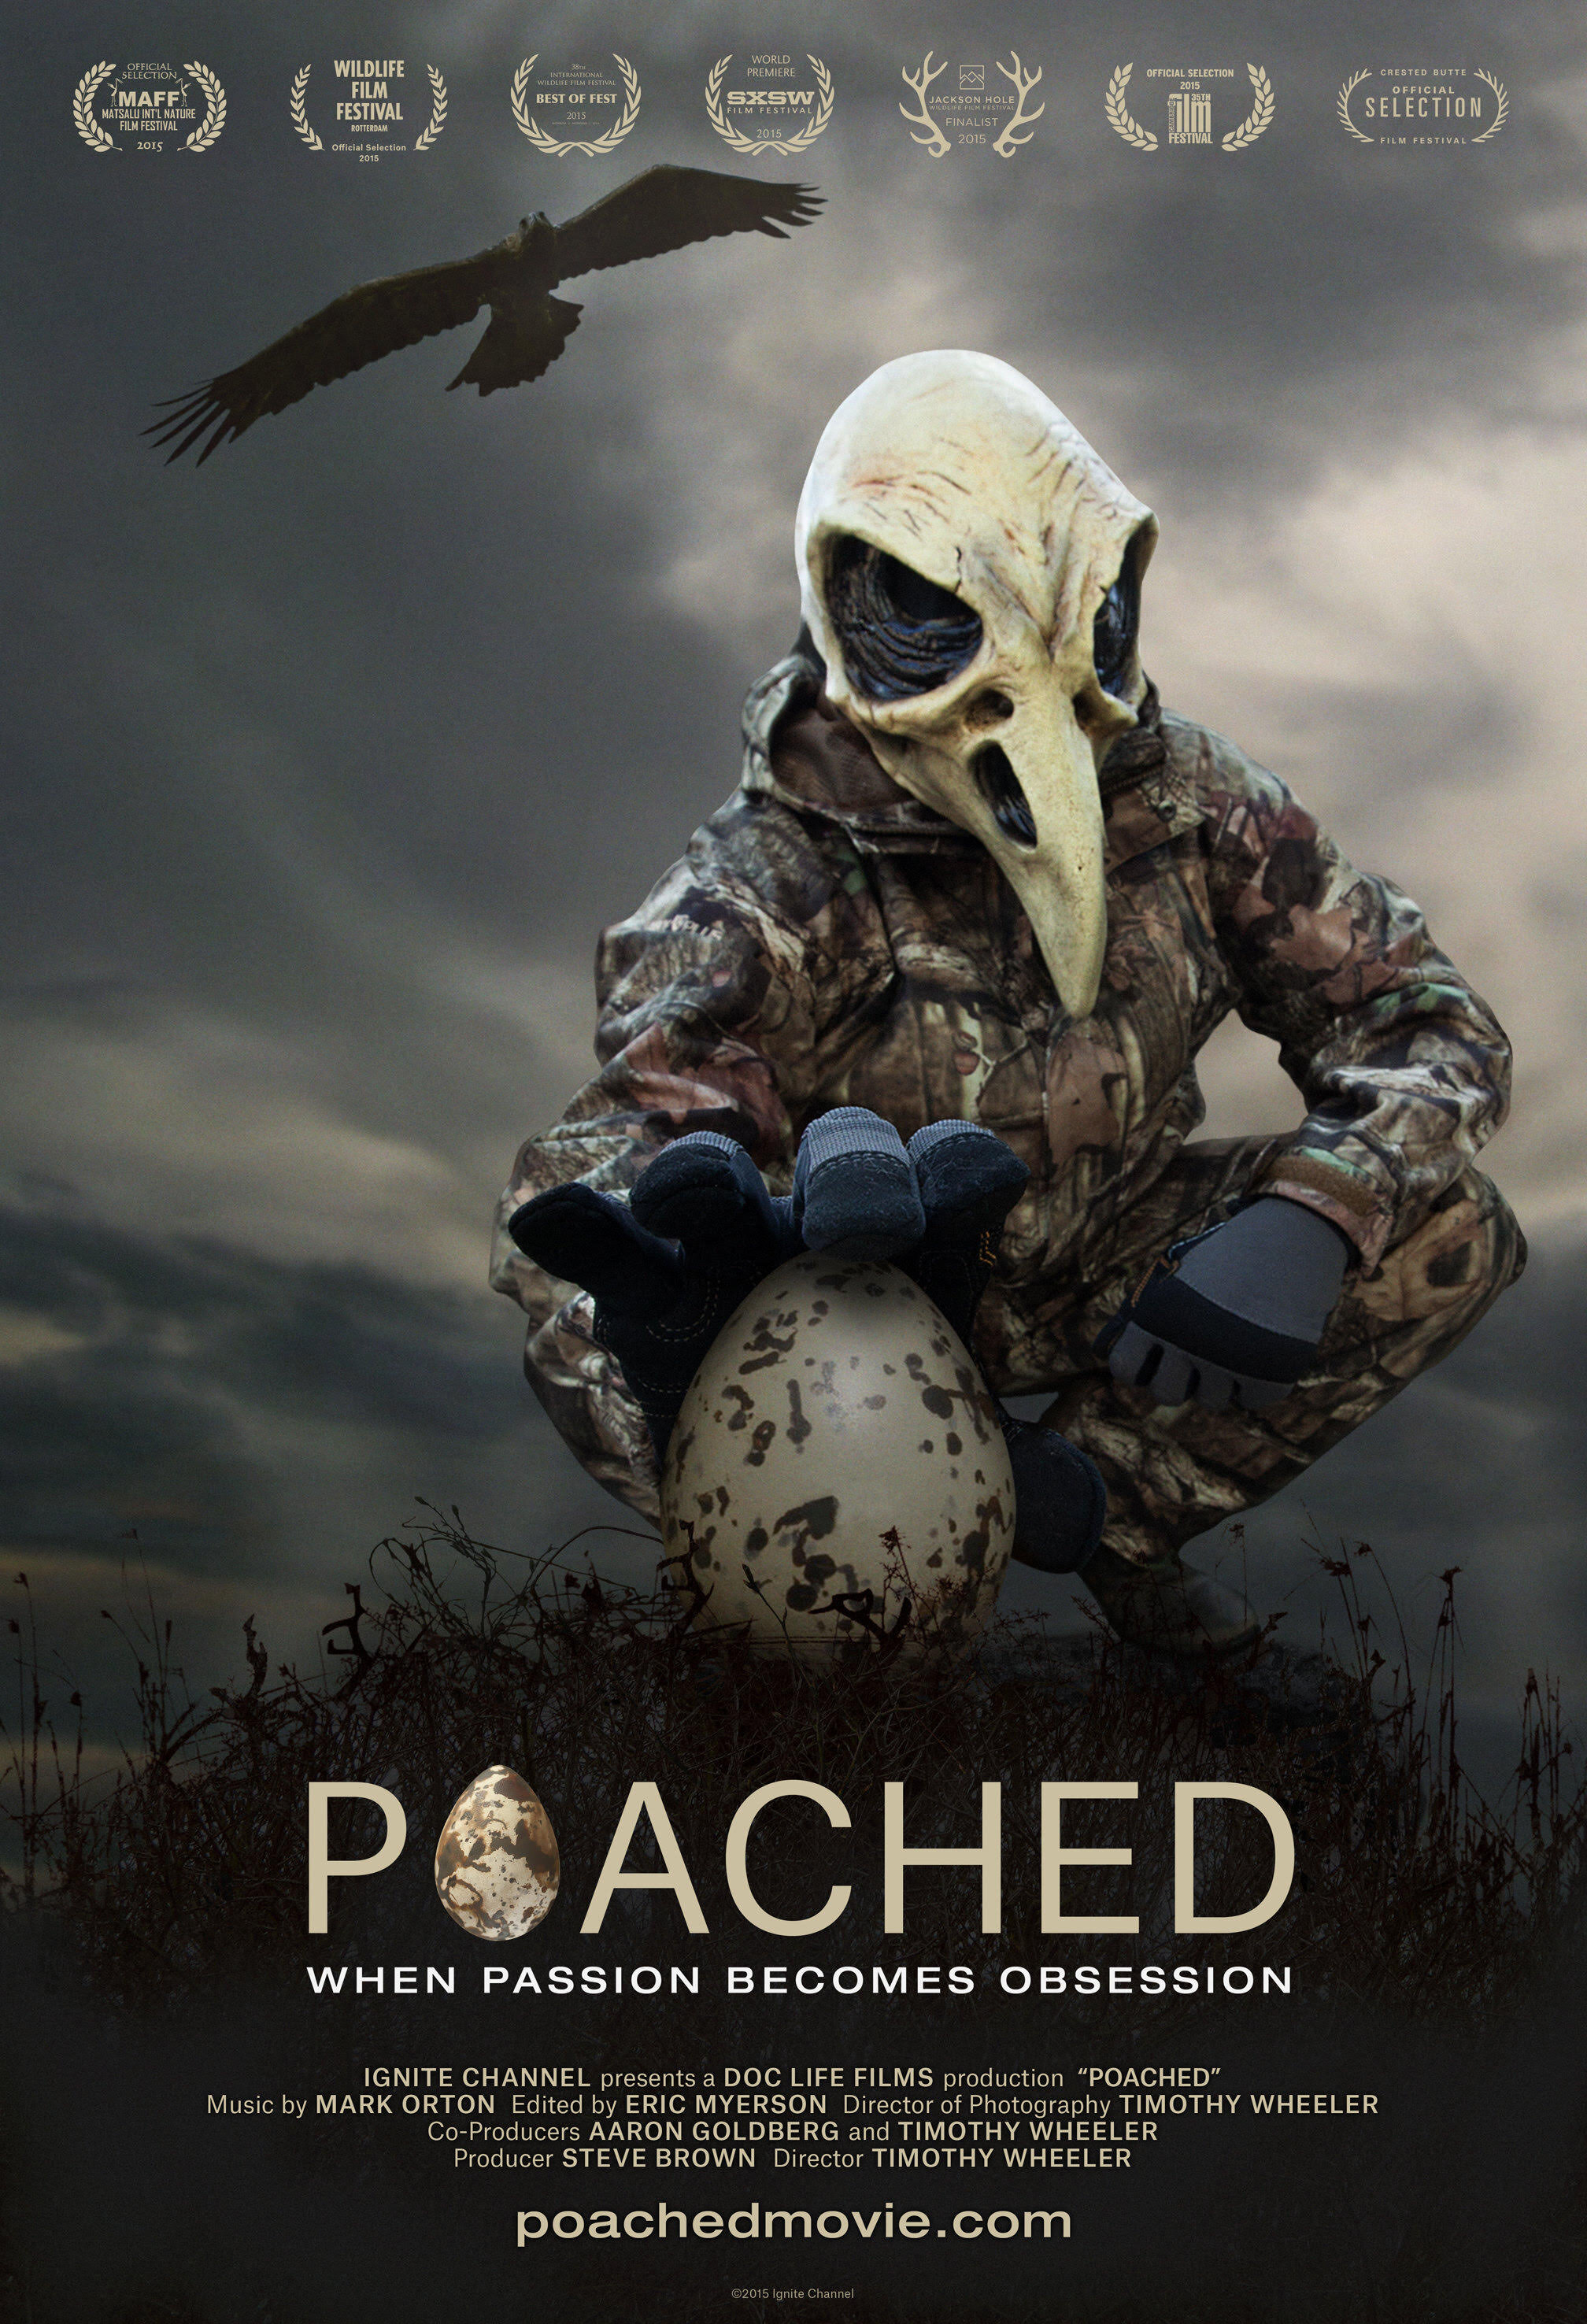 POACHED TRAILER